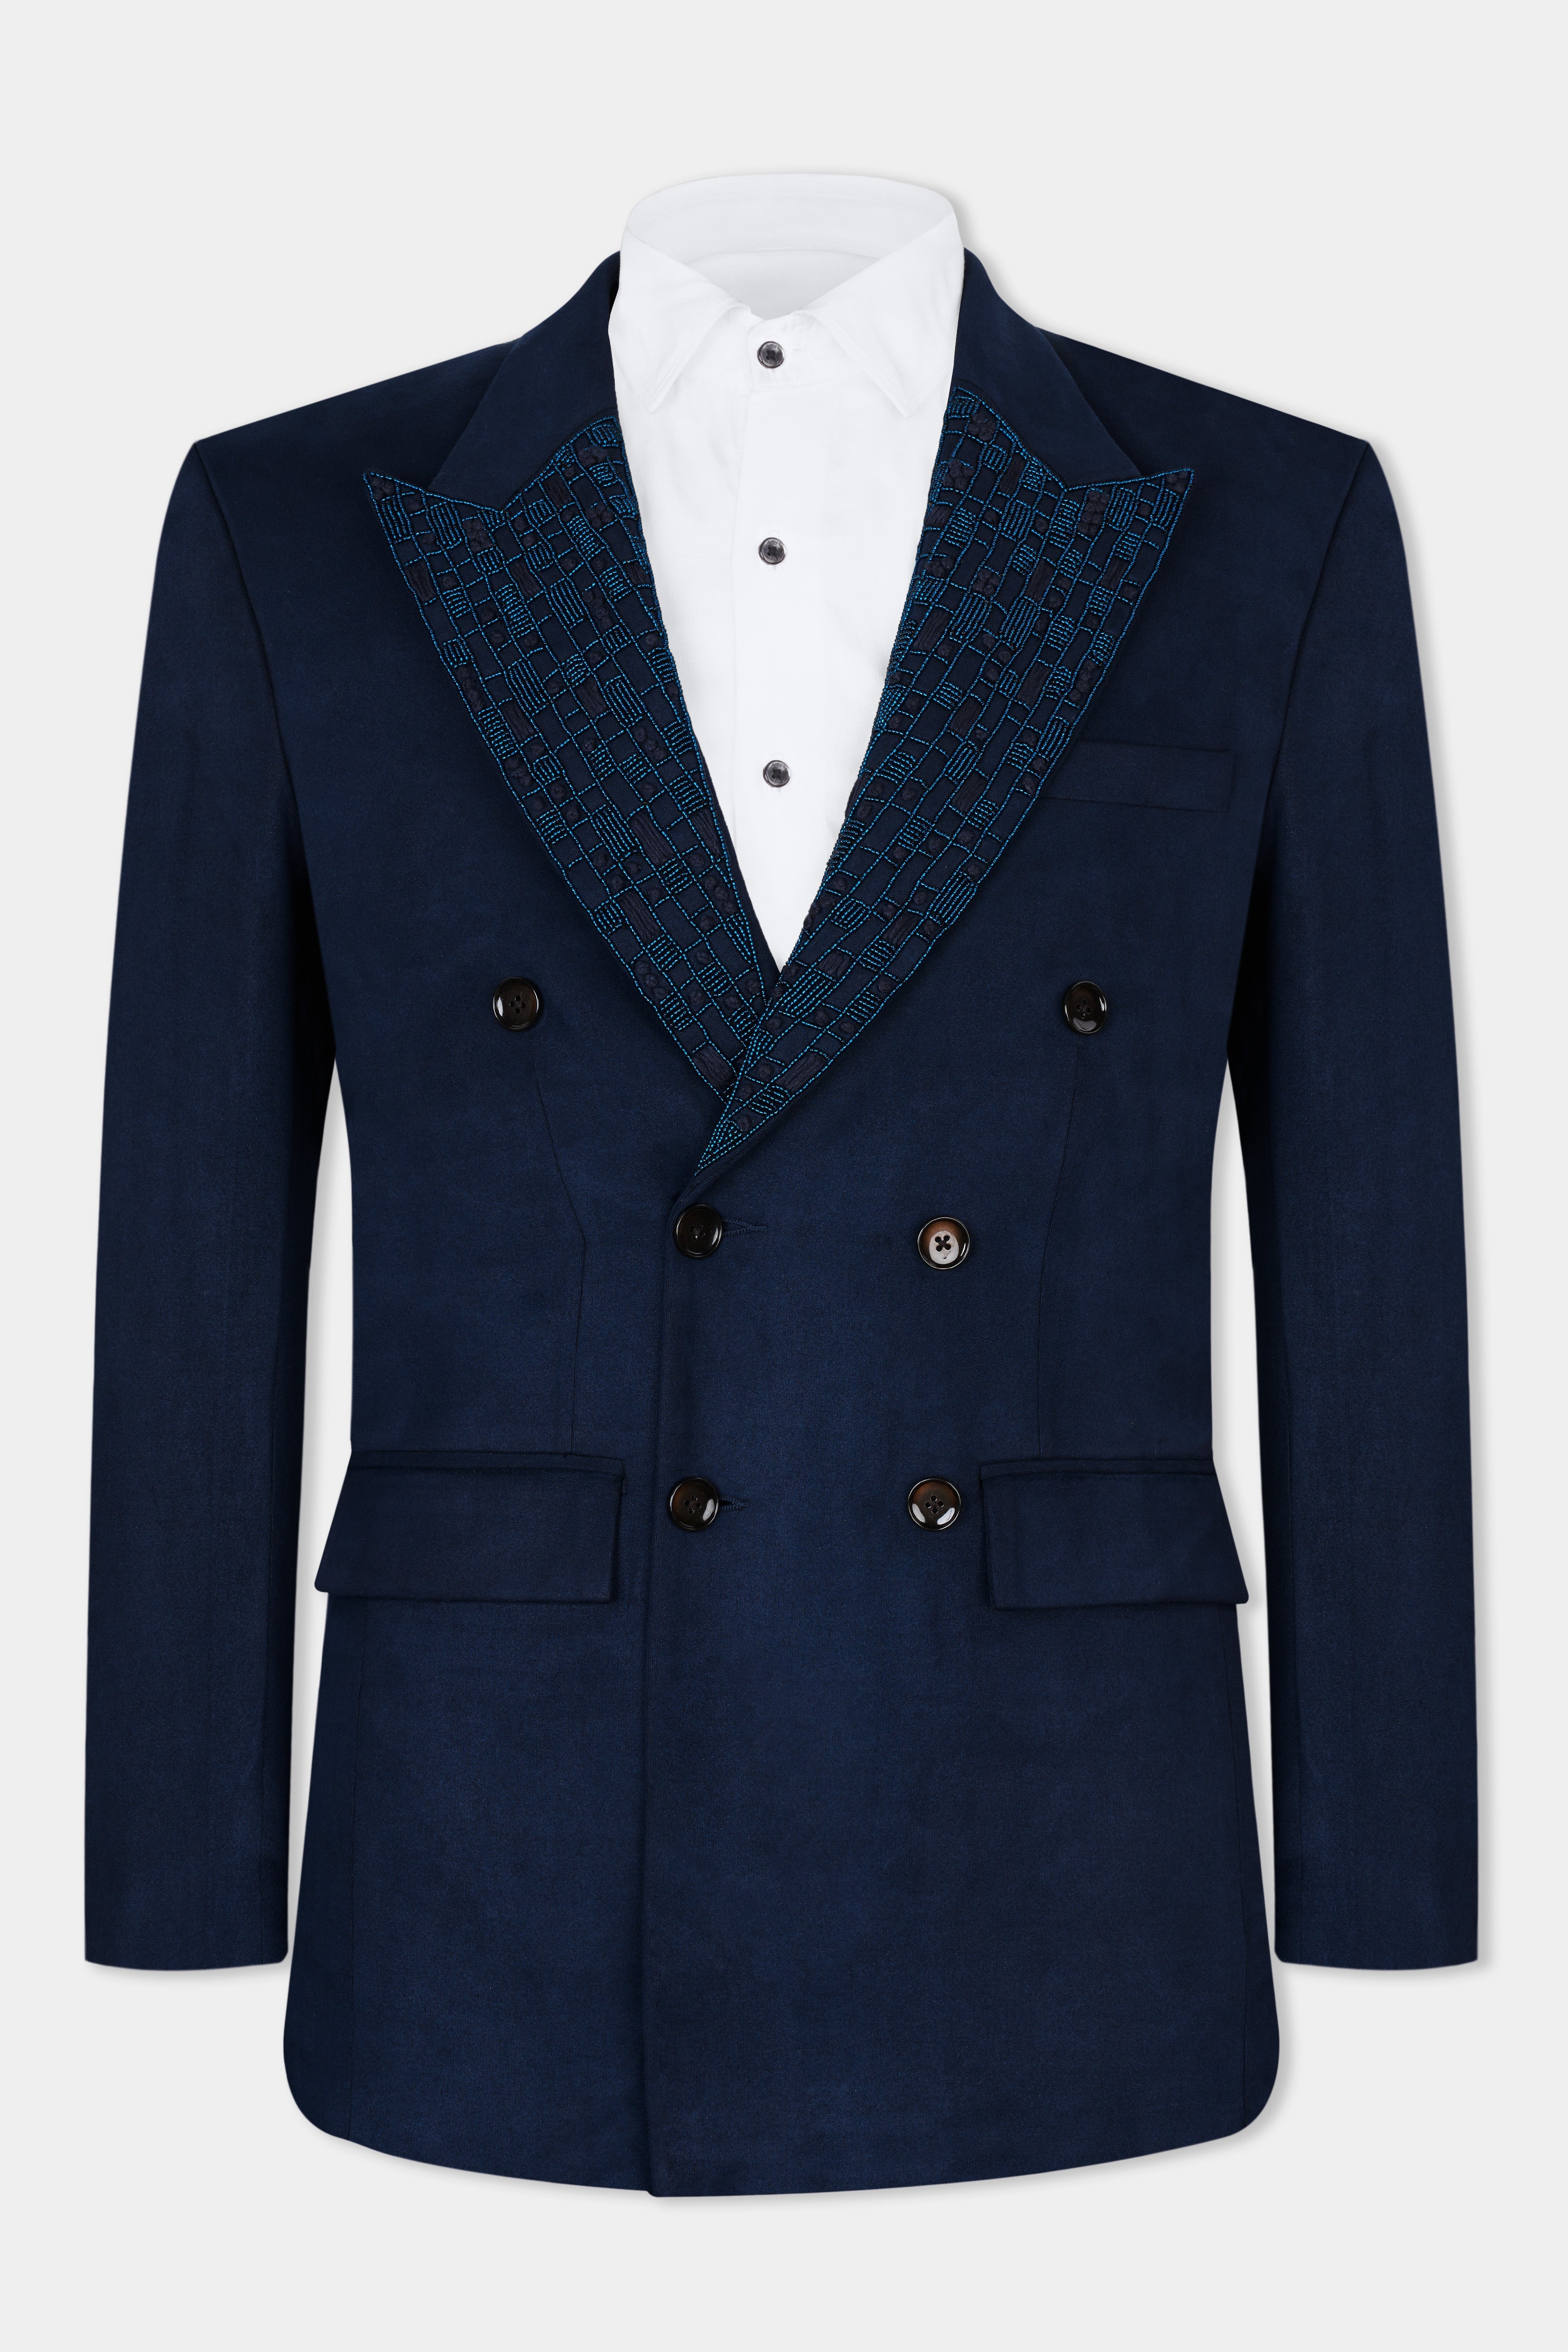 Midnight Blue Double Breasted Stretchable Designer Blazer BL2848-DB-KWL-D120-36, BL2848-DB-KWL-D120-38, BL2848-DB-KWL-D120-40, BL2848-DB-KWL-D120-42, BL2848-DB-KWL-D120-44, BL2848-DB-KWL-D120-46, BL2848-DB-KWL-D120-48, BL2848-DB-KWL-D120-50, BL2848-DB-KWL-D120-52, BL2848-DB-KWL-D120-54, BL2848-DB-KWL-D120-56, BL2848-DB-KWL-D120-58, BL2848-DB-KWL-D120-60